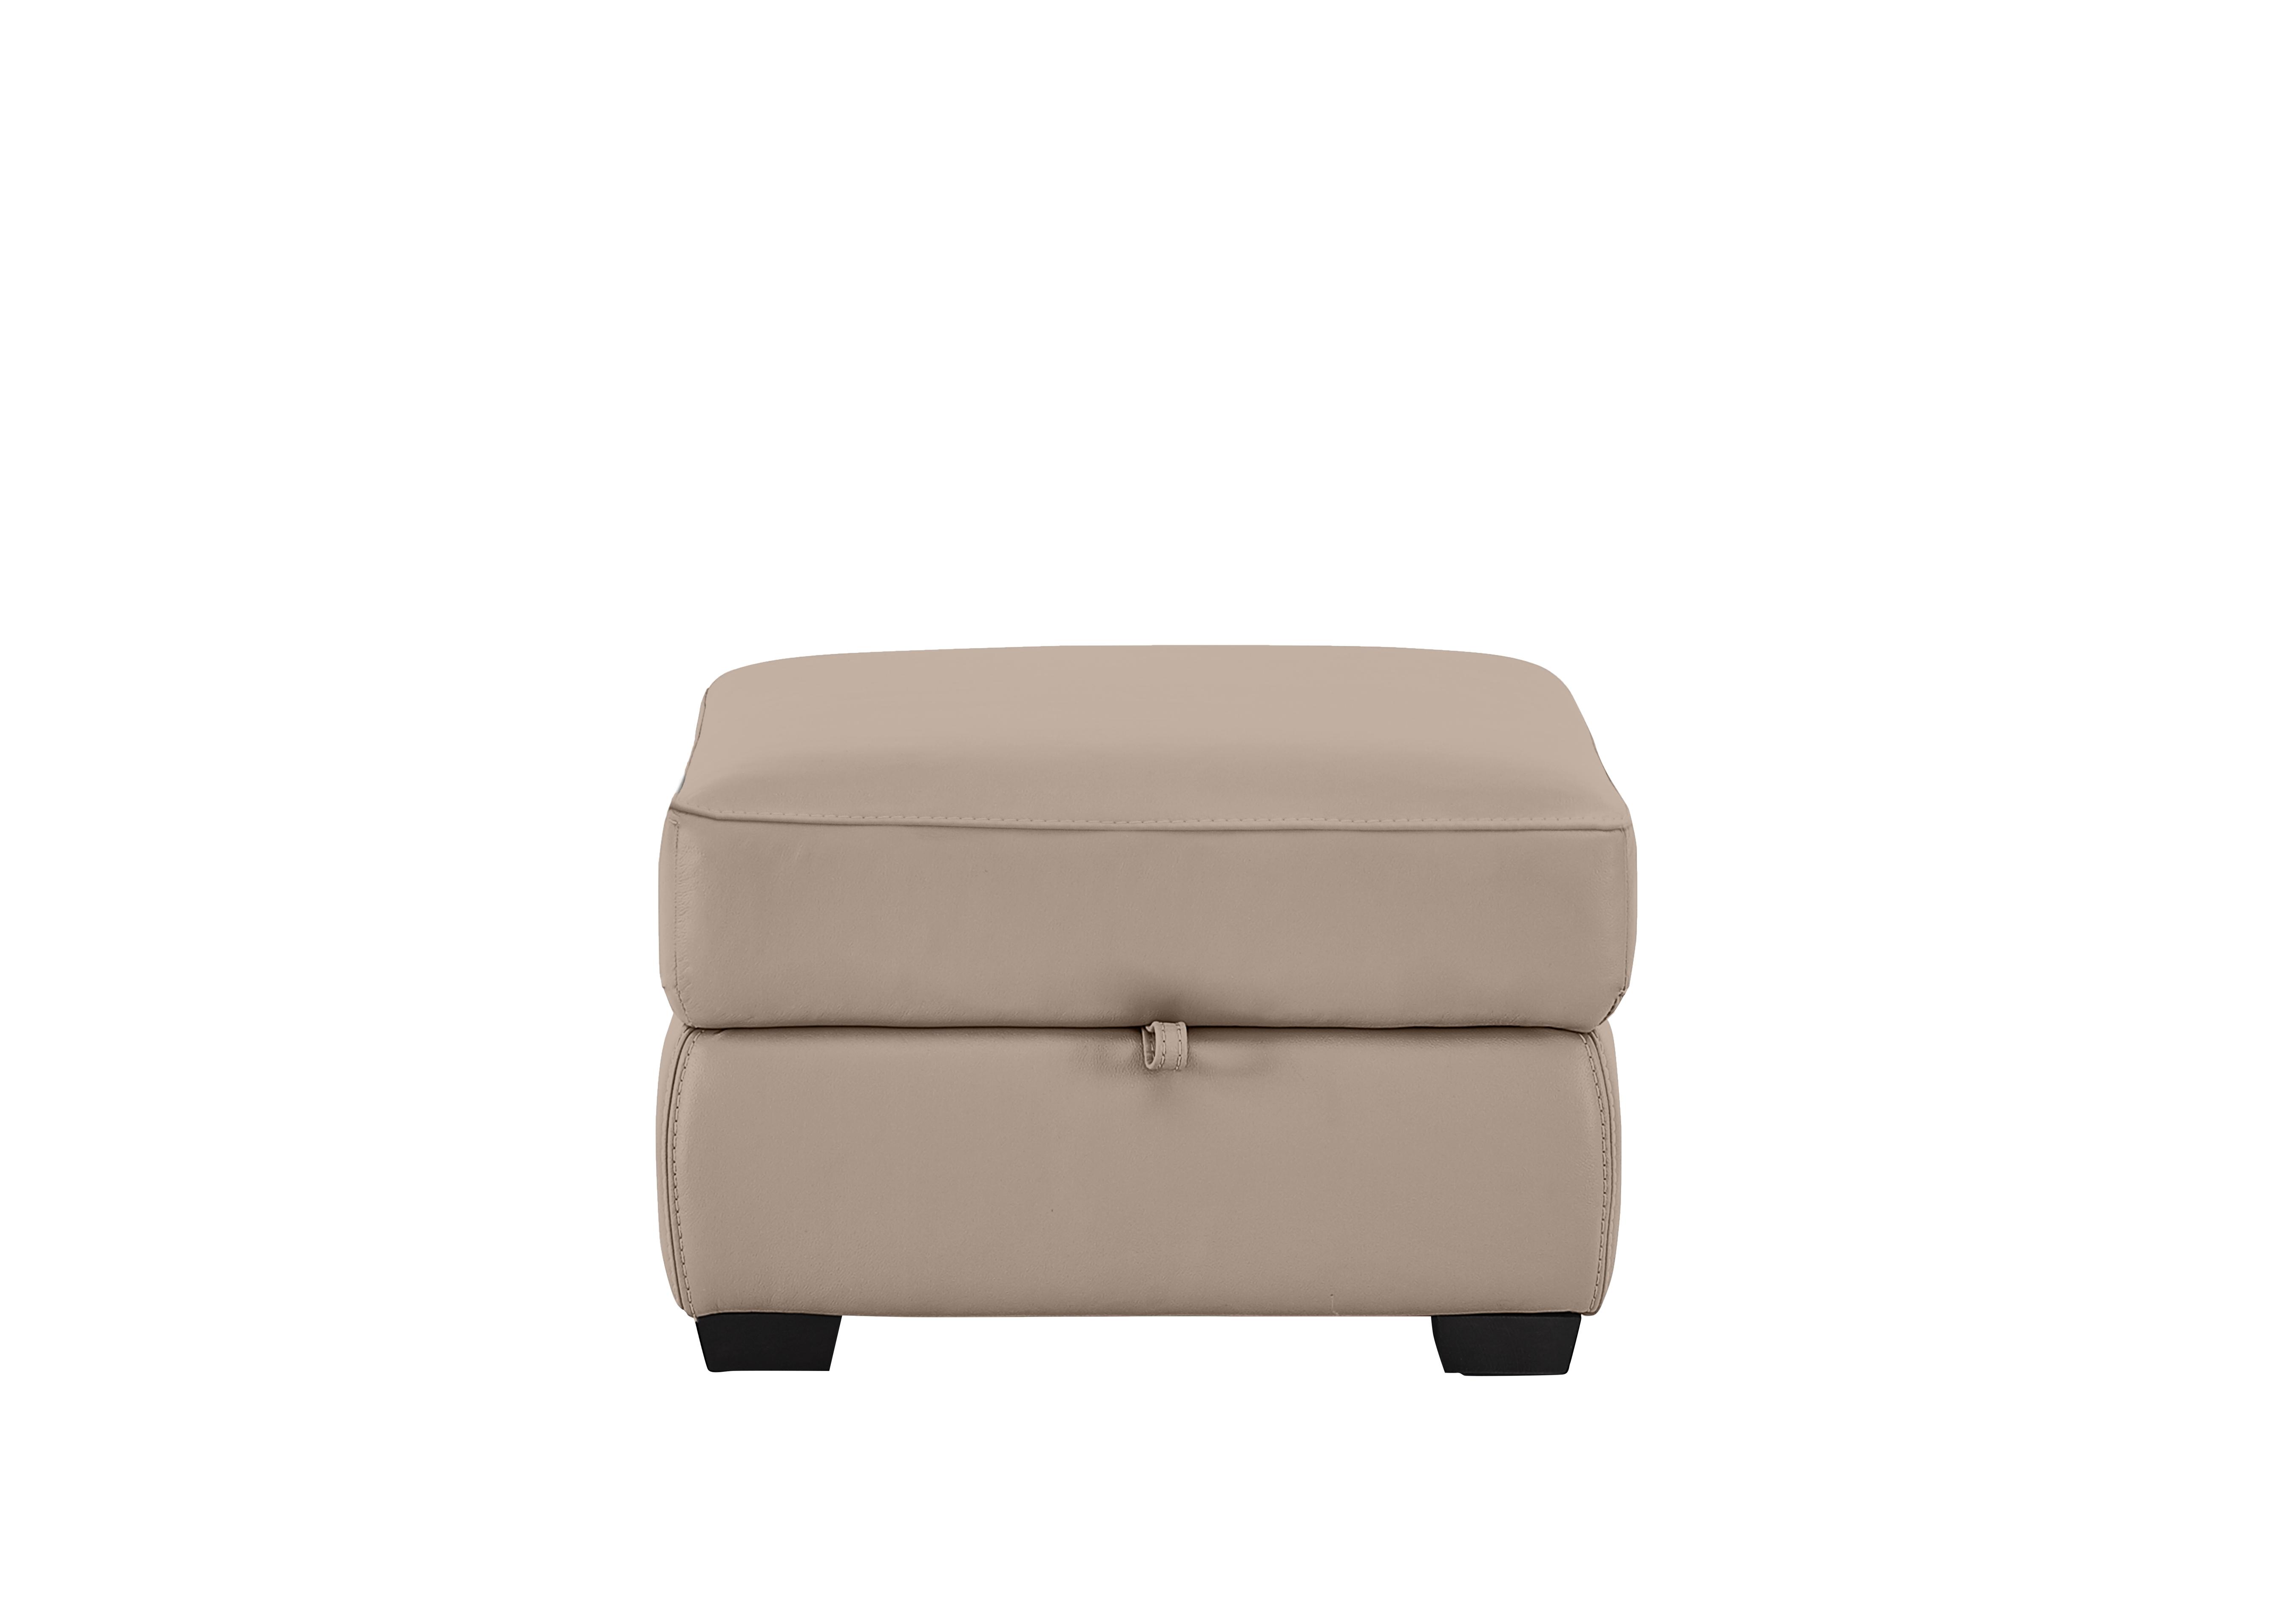 Starlight Express Leather Storage Footstool in Bv-039c Pebble on Furniture Village